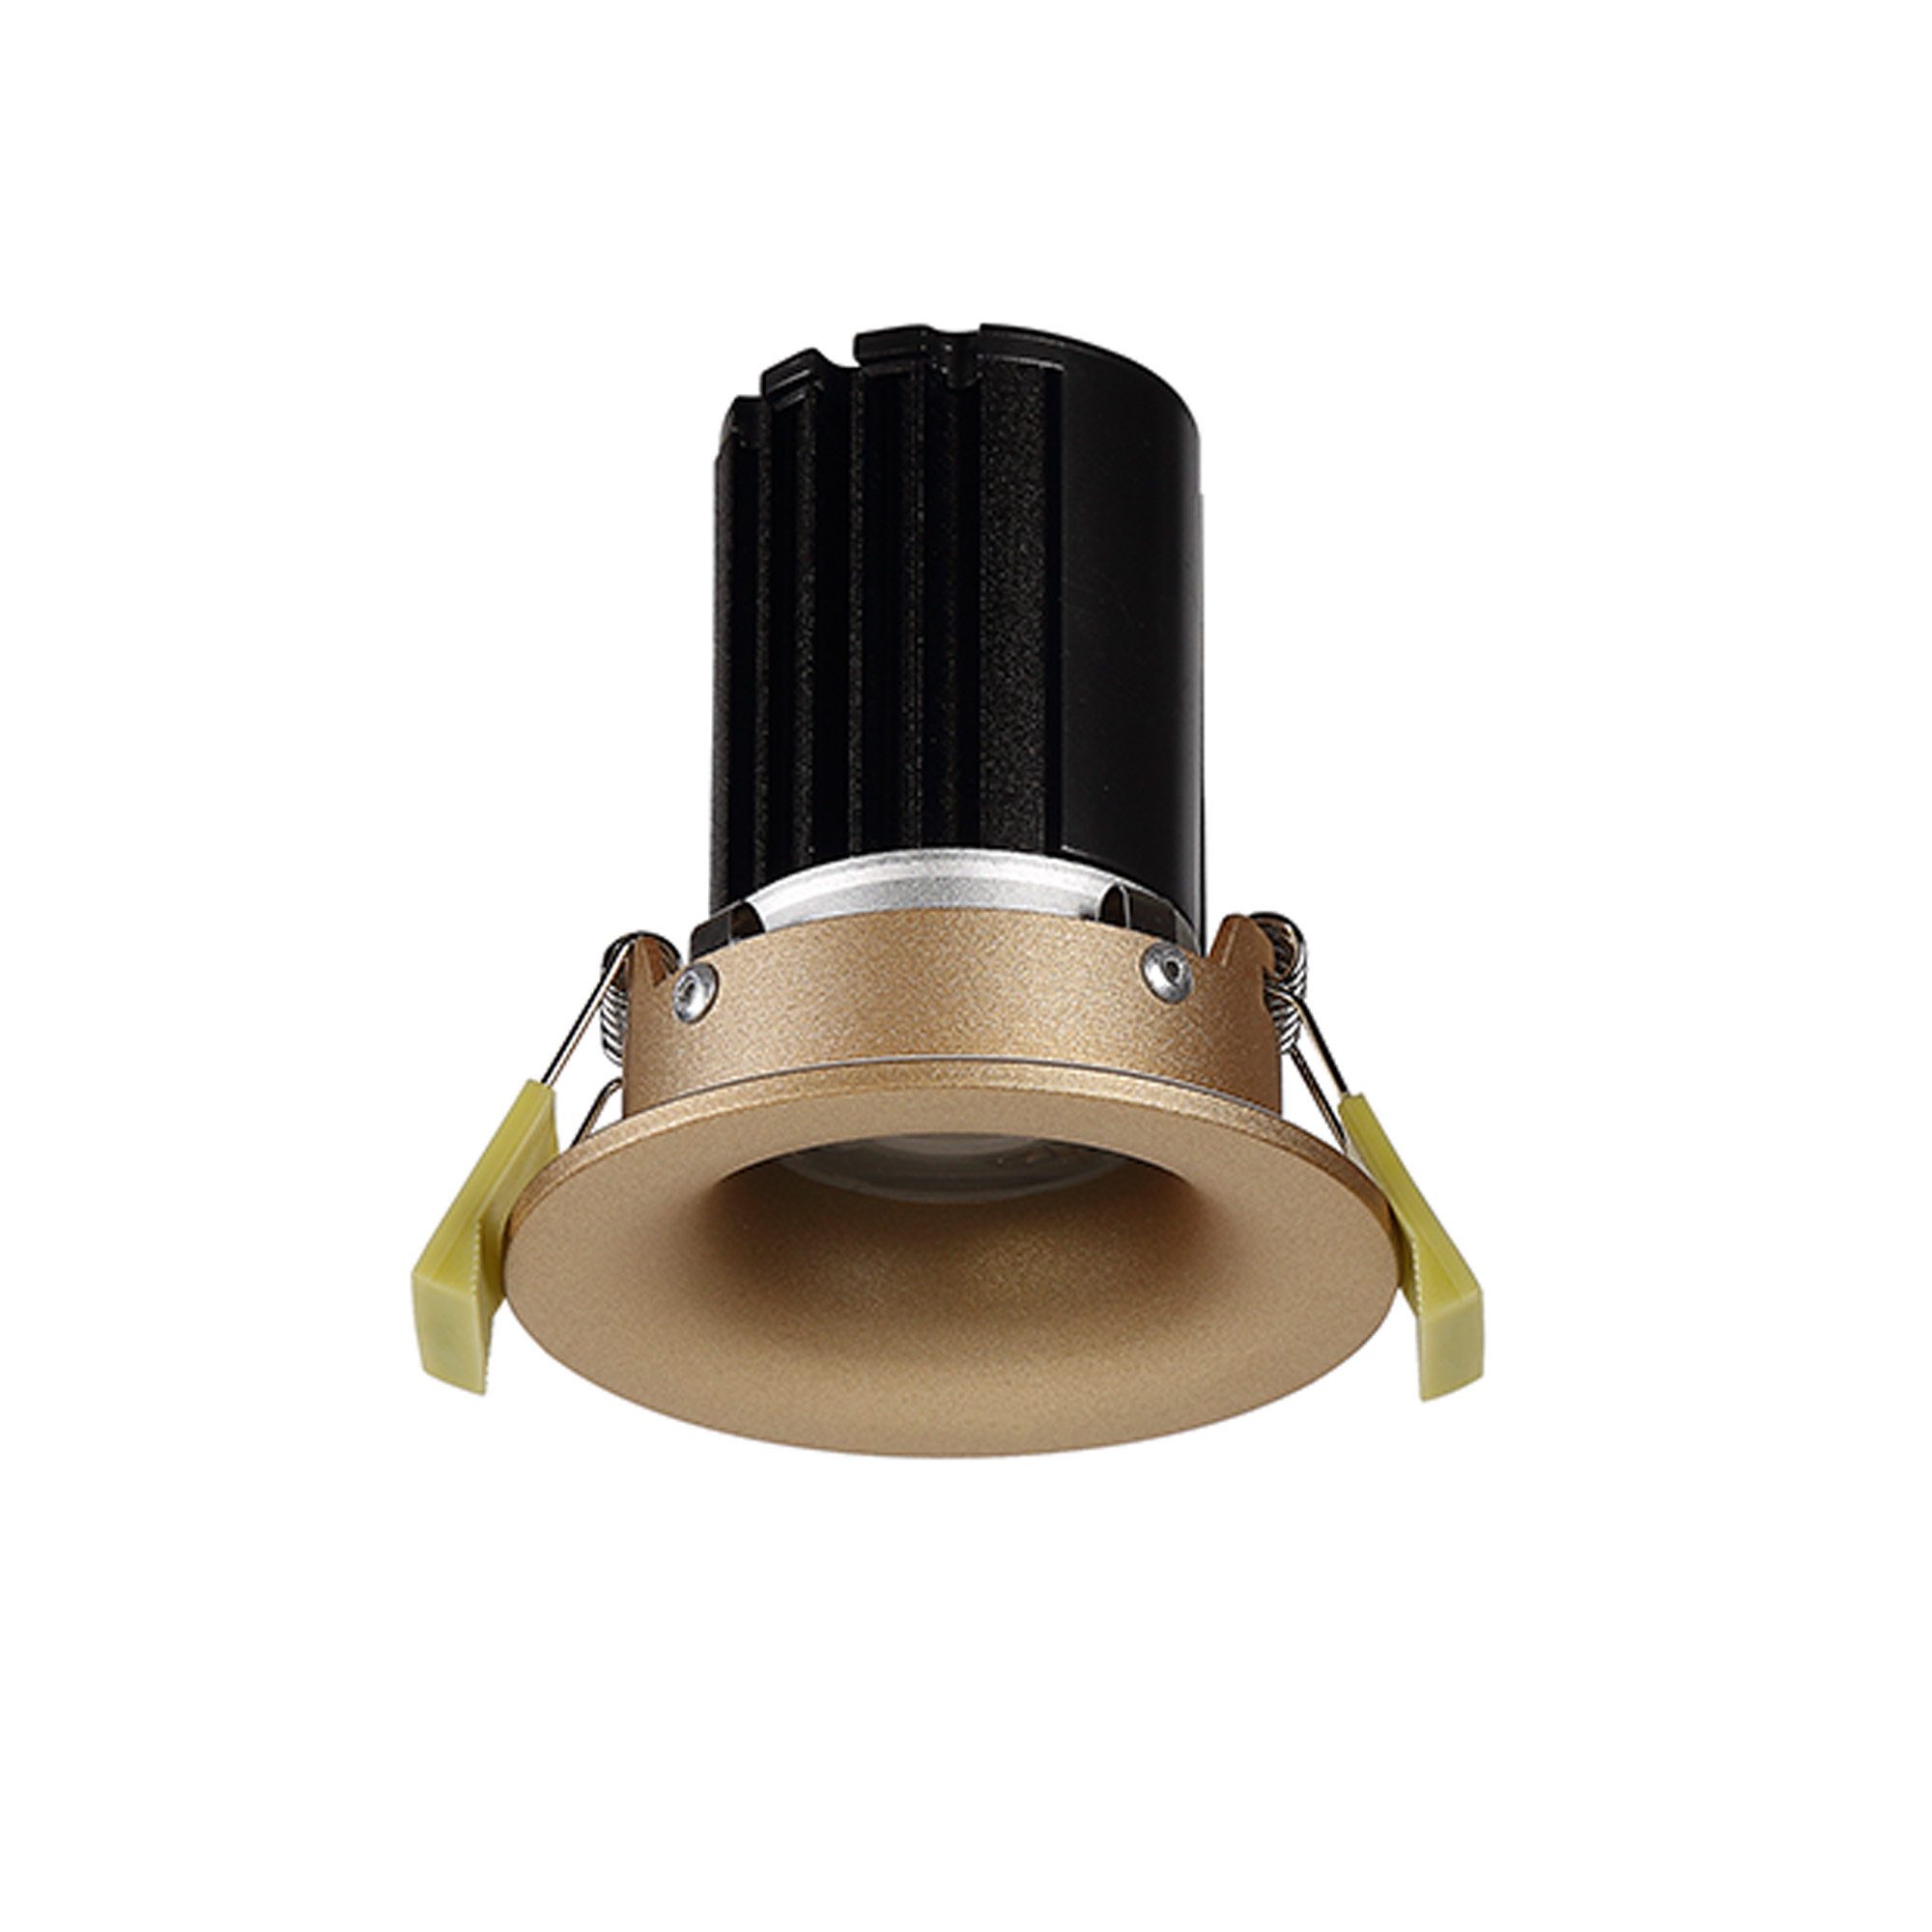 DM201486  Bruve 9 Tridonic powered 9W 2700K 700lm 24° LED Engine,250mA , CRI>90 LED Engine Champagne Gold Fixed Round Recessed Downlight, Inner Glass cover, IP65